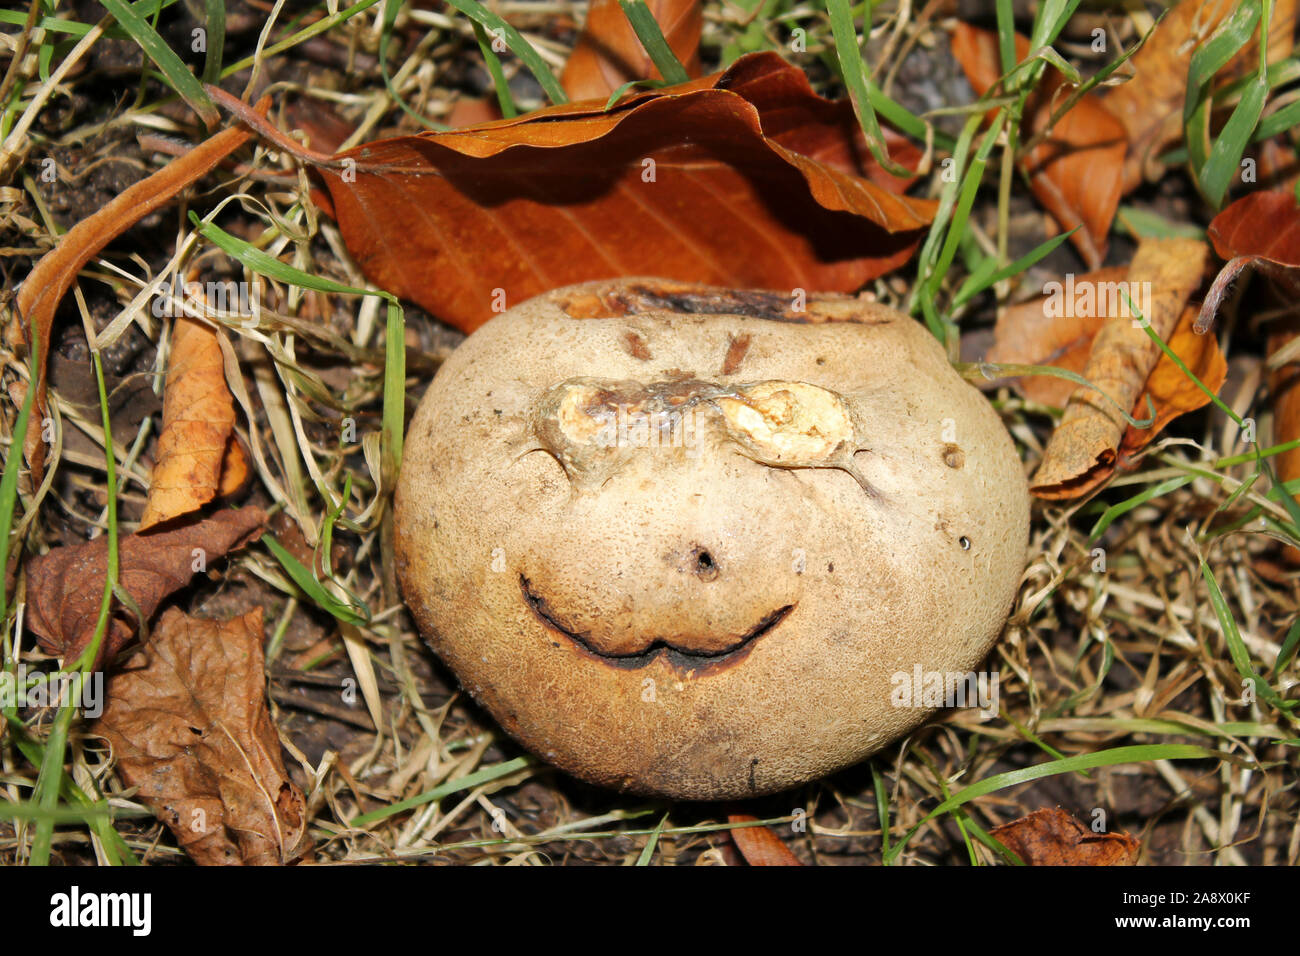 Comical Smiley Face on a Common Earthball Scleroderma citrinum Stock Photo